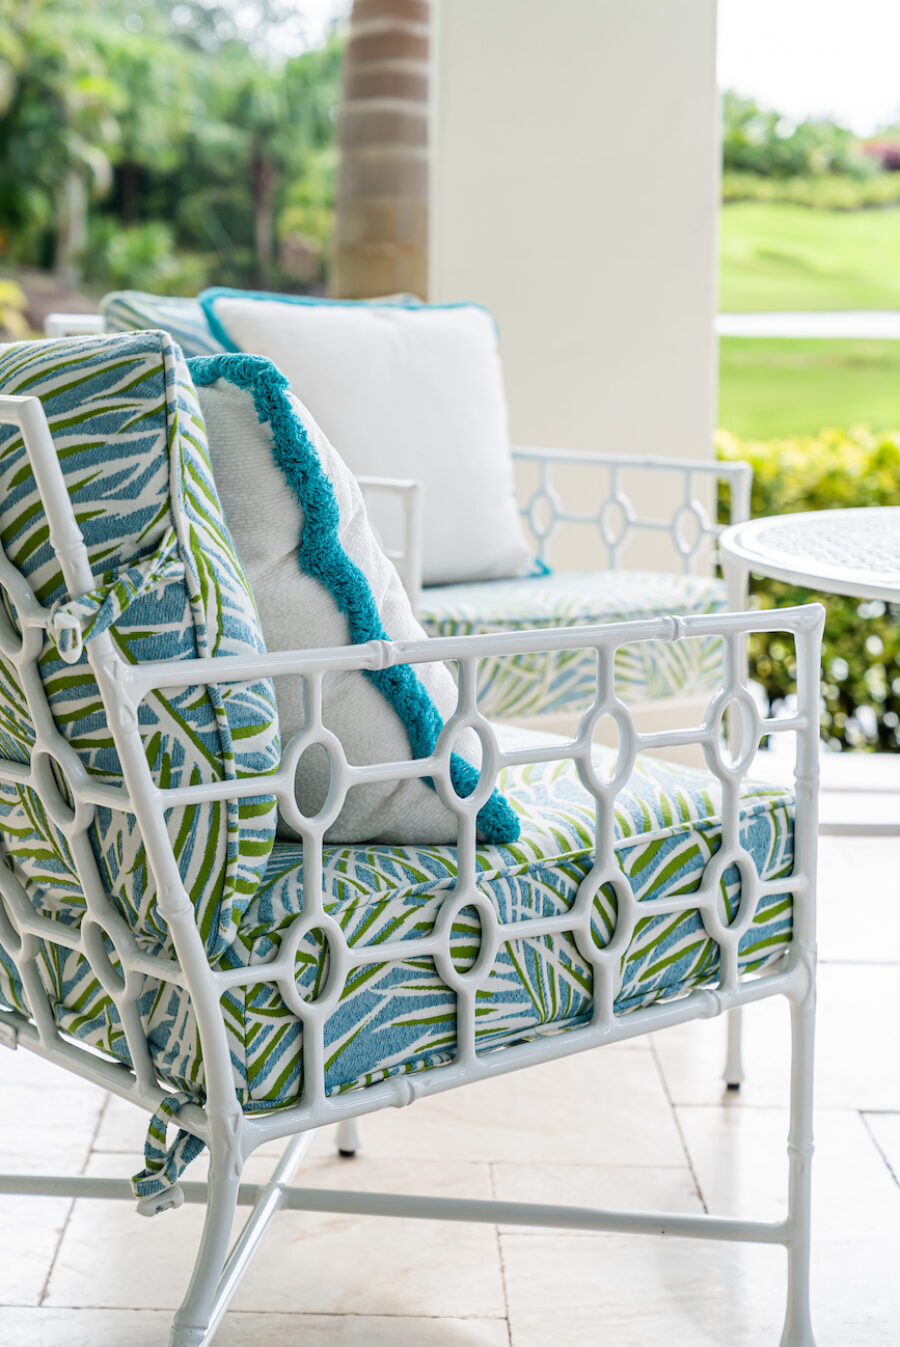 outdoor-chair-detail-teal-green-blue-white